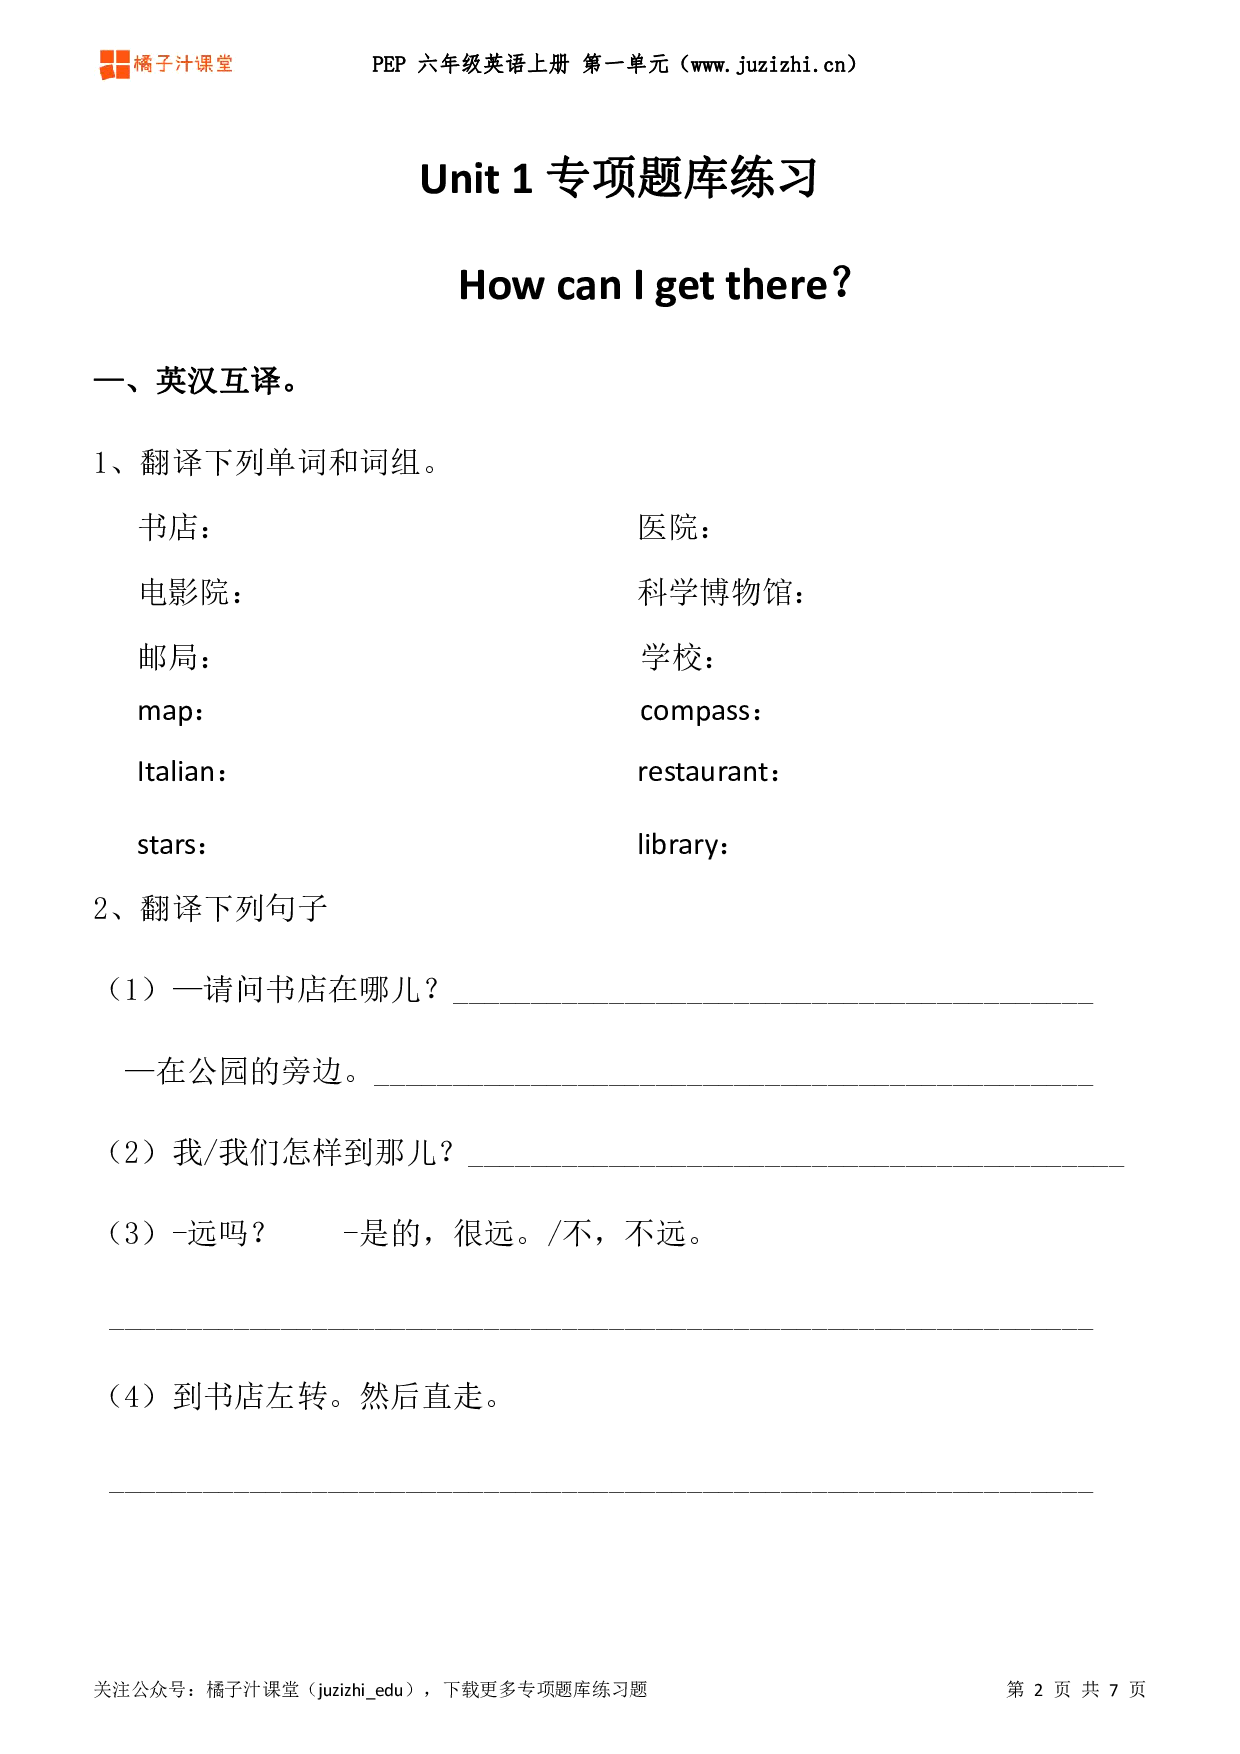 【PEP英语】六年级上册Unit 1 《How can we get there》专项题库练习